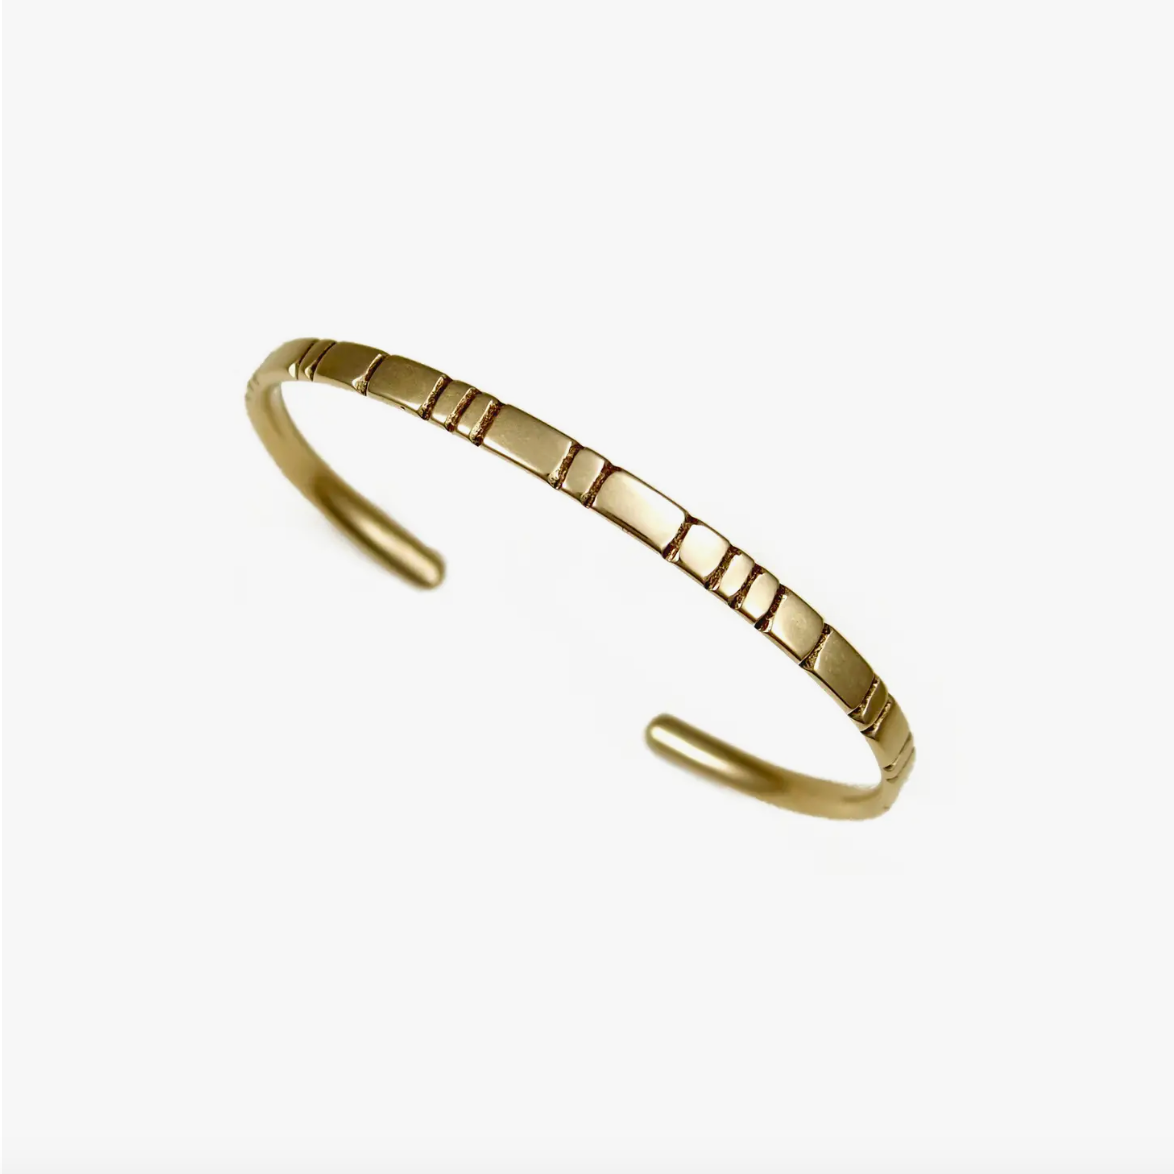 Gold cuff bracelet with linear carved designs.